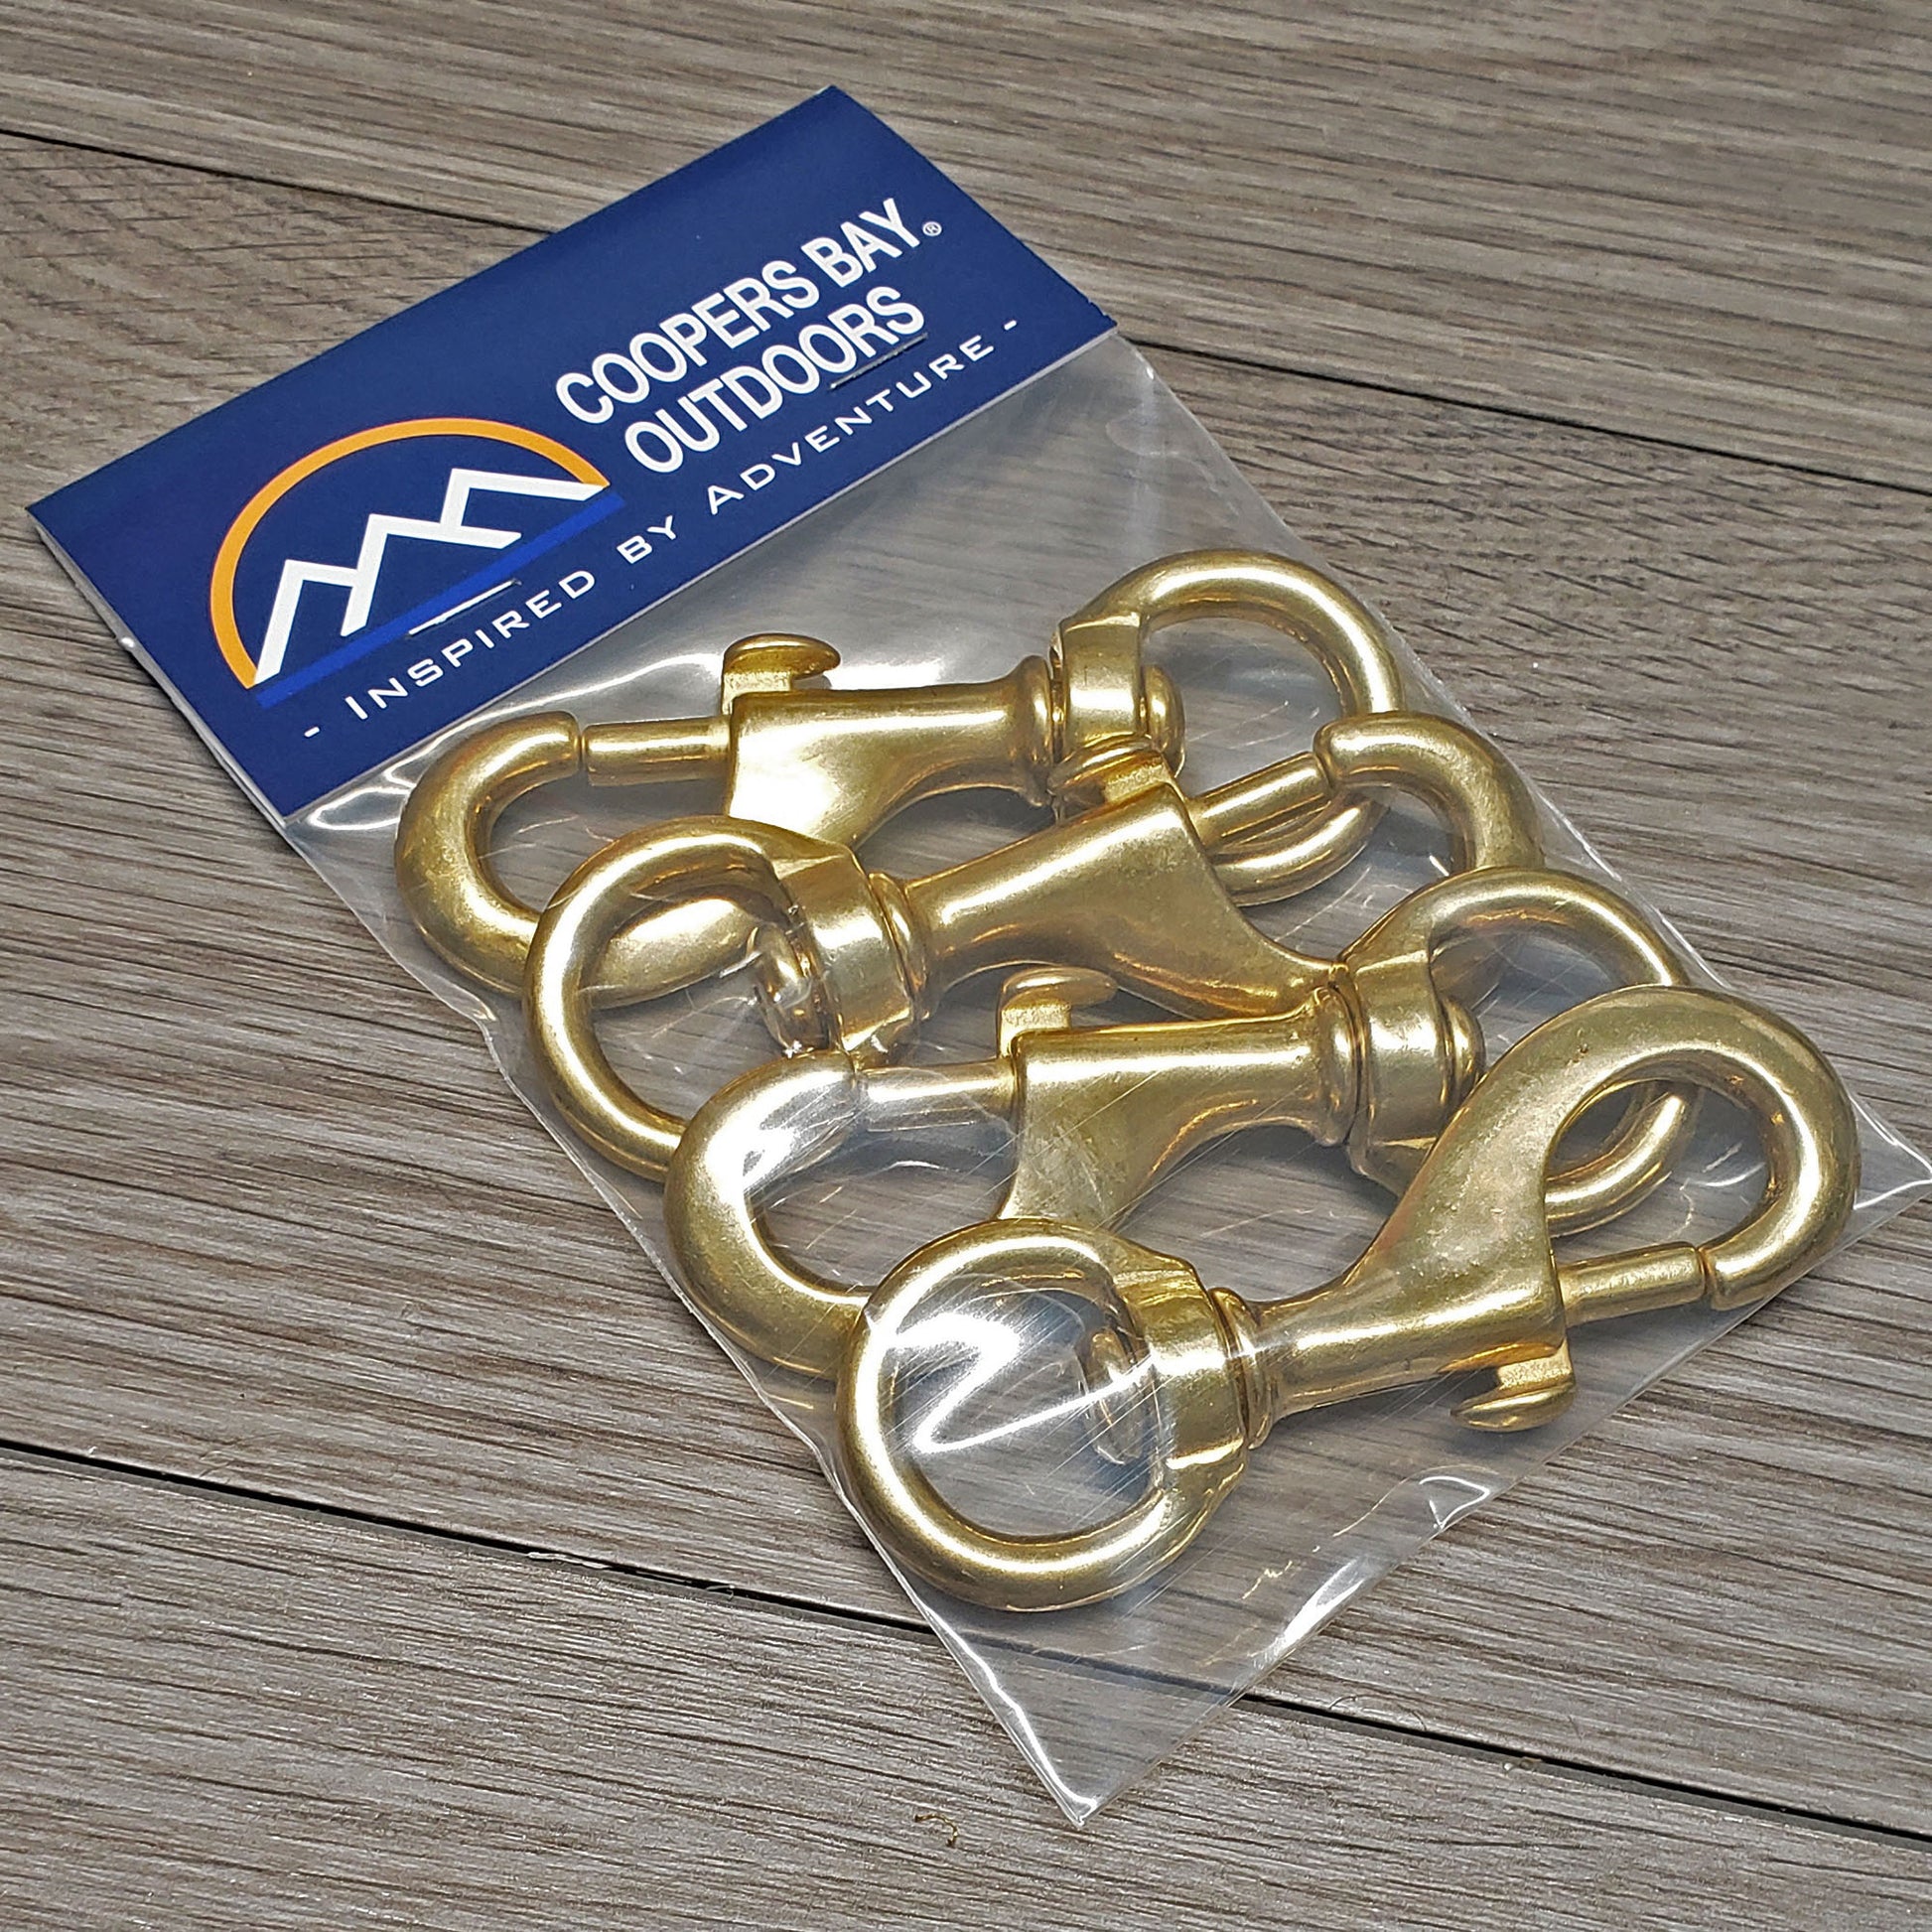 Solid Brass Swivel Snaps - Large Heavy-Duty Size for Large Pet Leashes, Tie-Outs, etc.